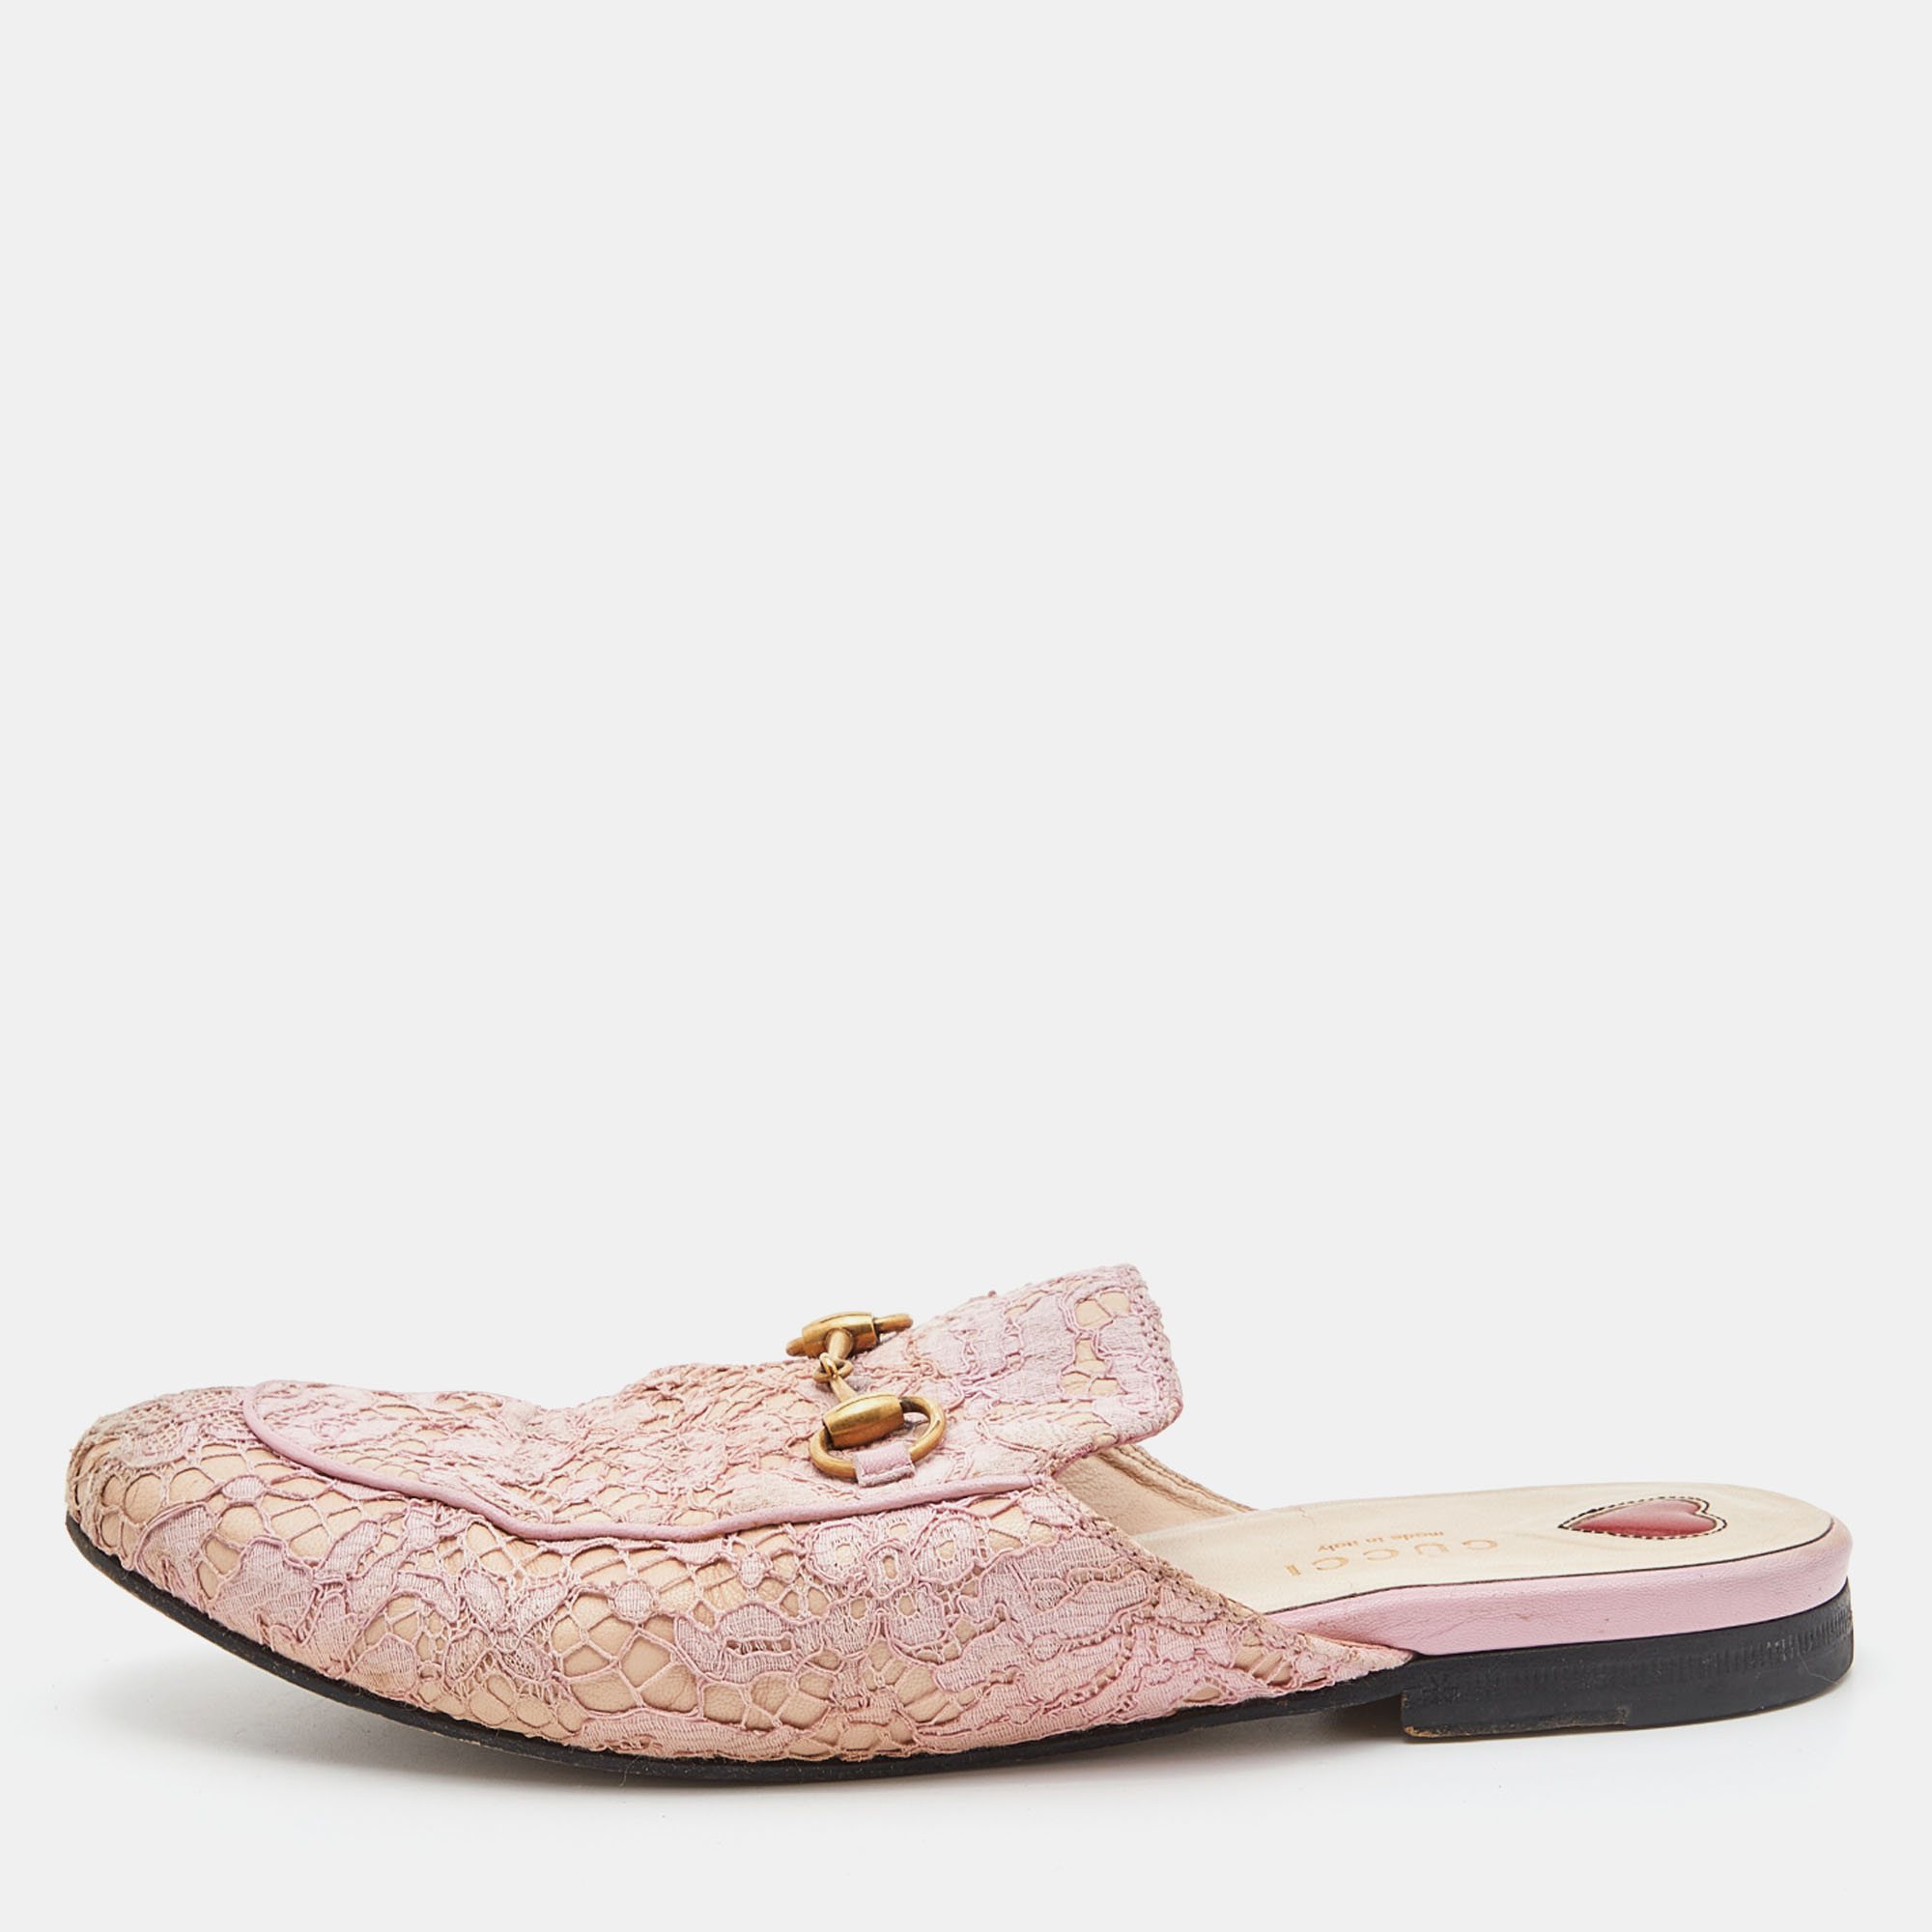 Pre-owned Gucci Pink Floral Lace And Leather Princetown Flat Mule Size 37.5